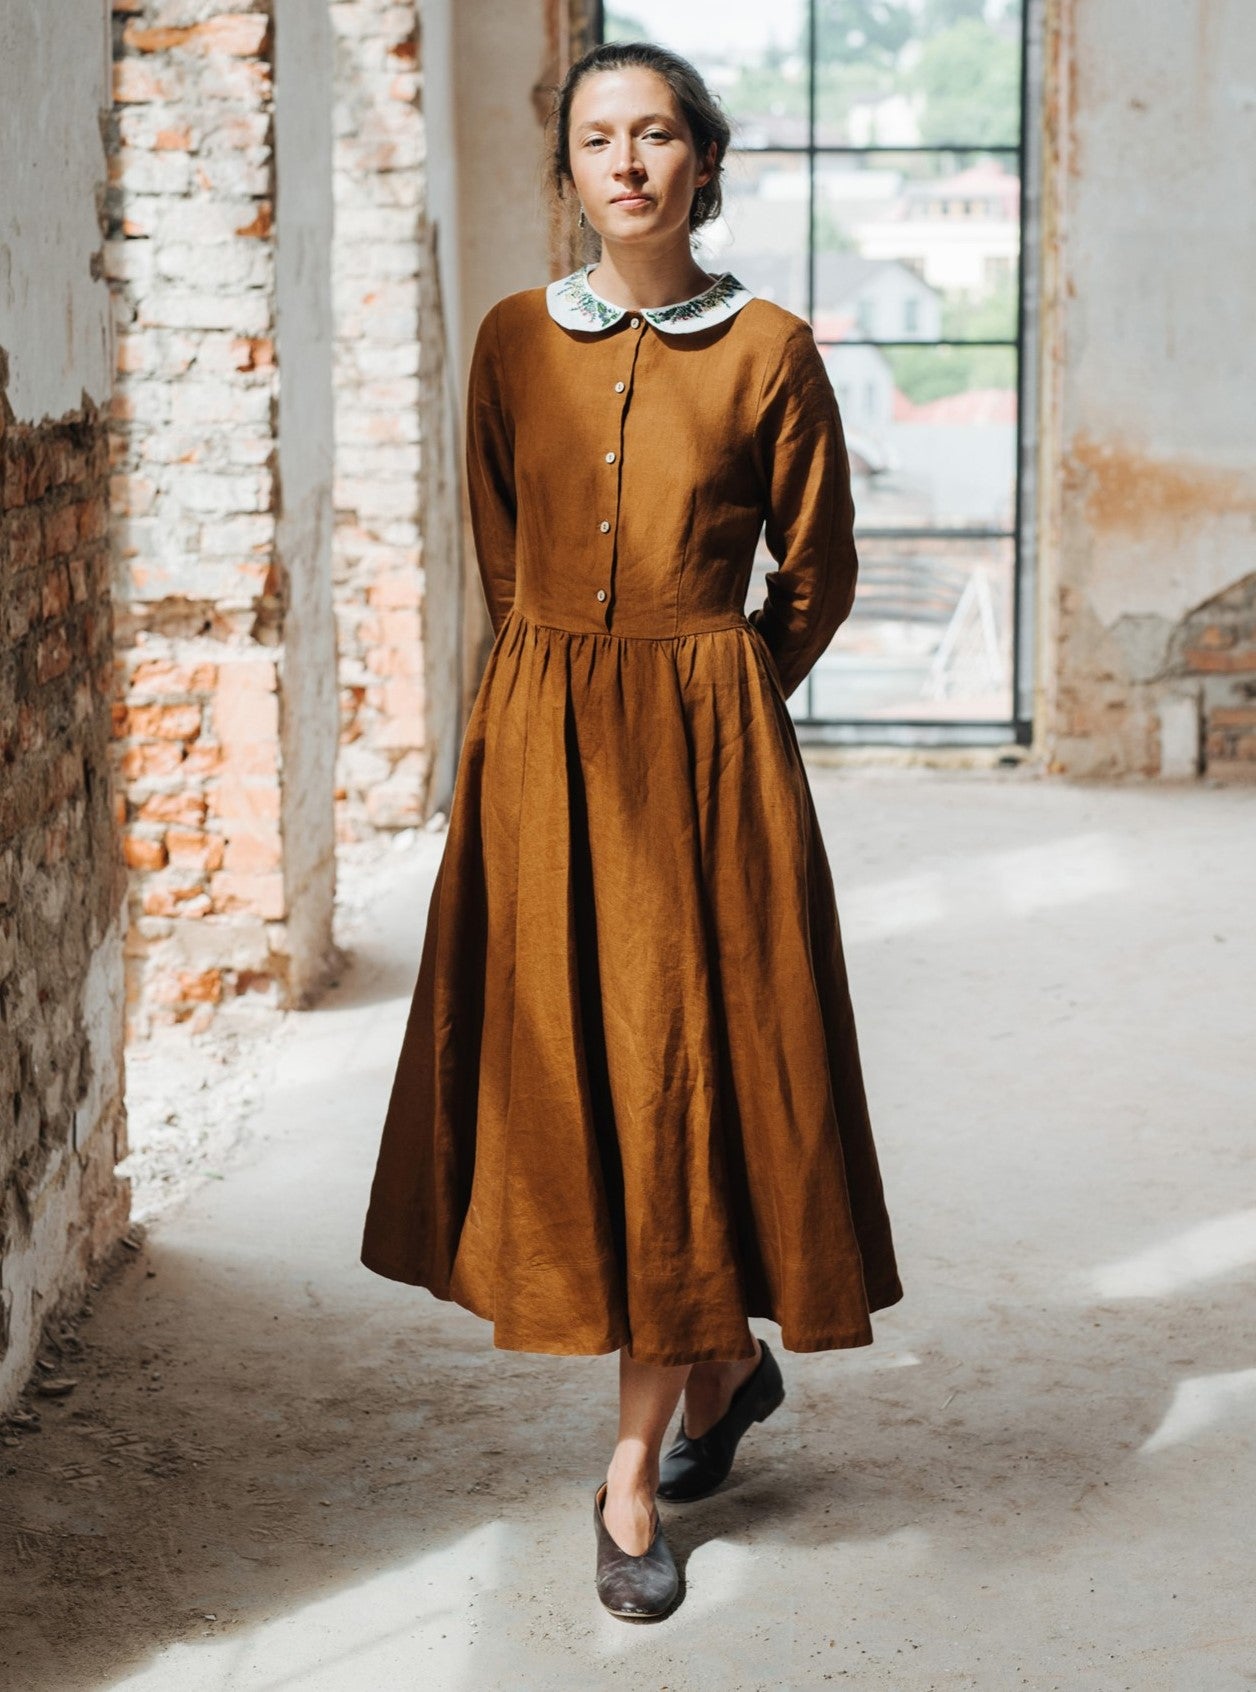 Linen Dresses With Embroidered Collar | Son de Flor